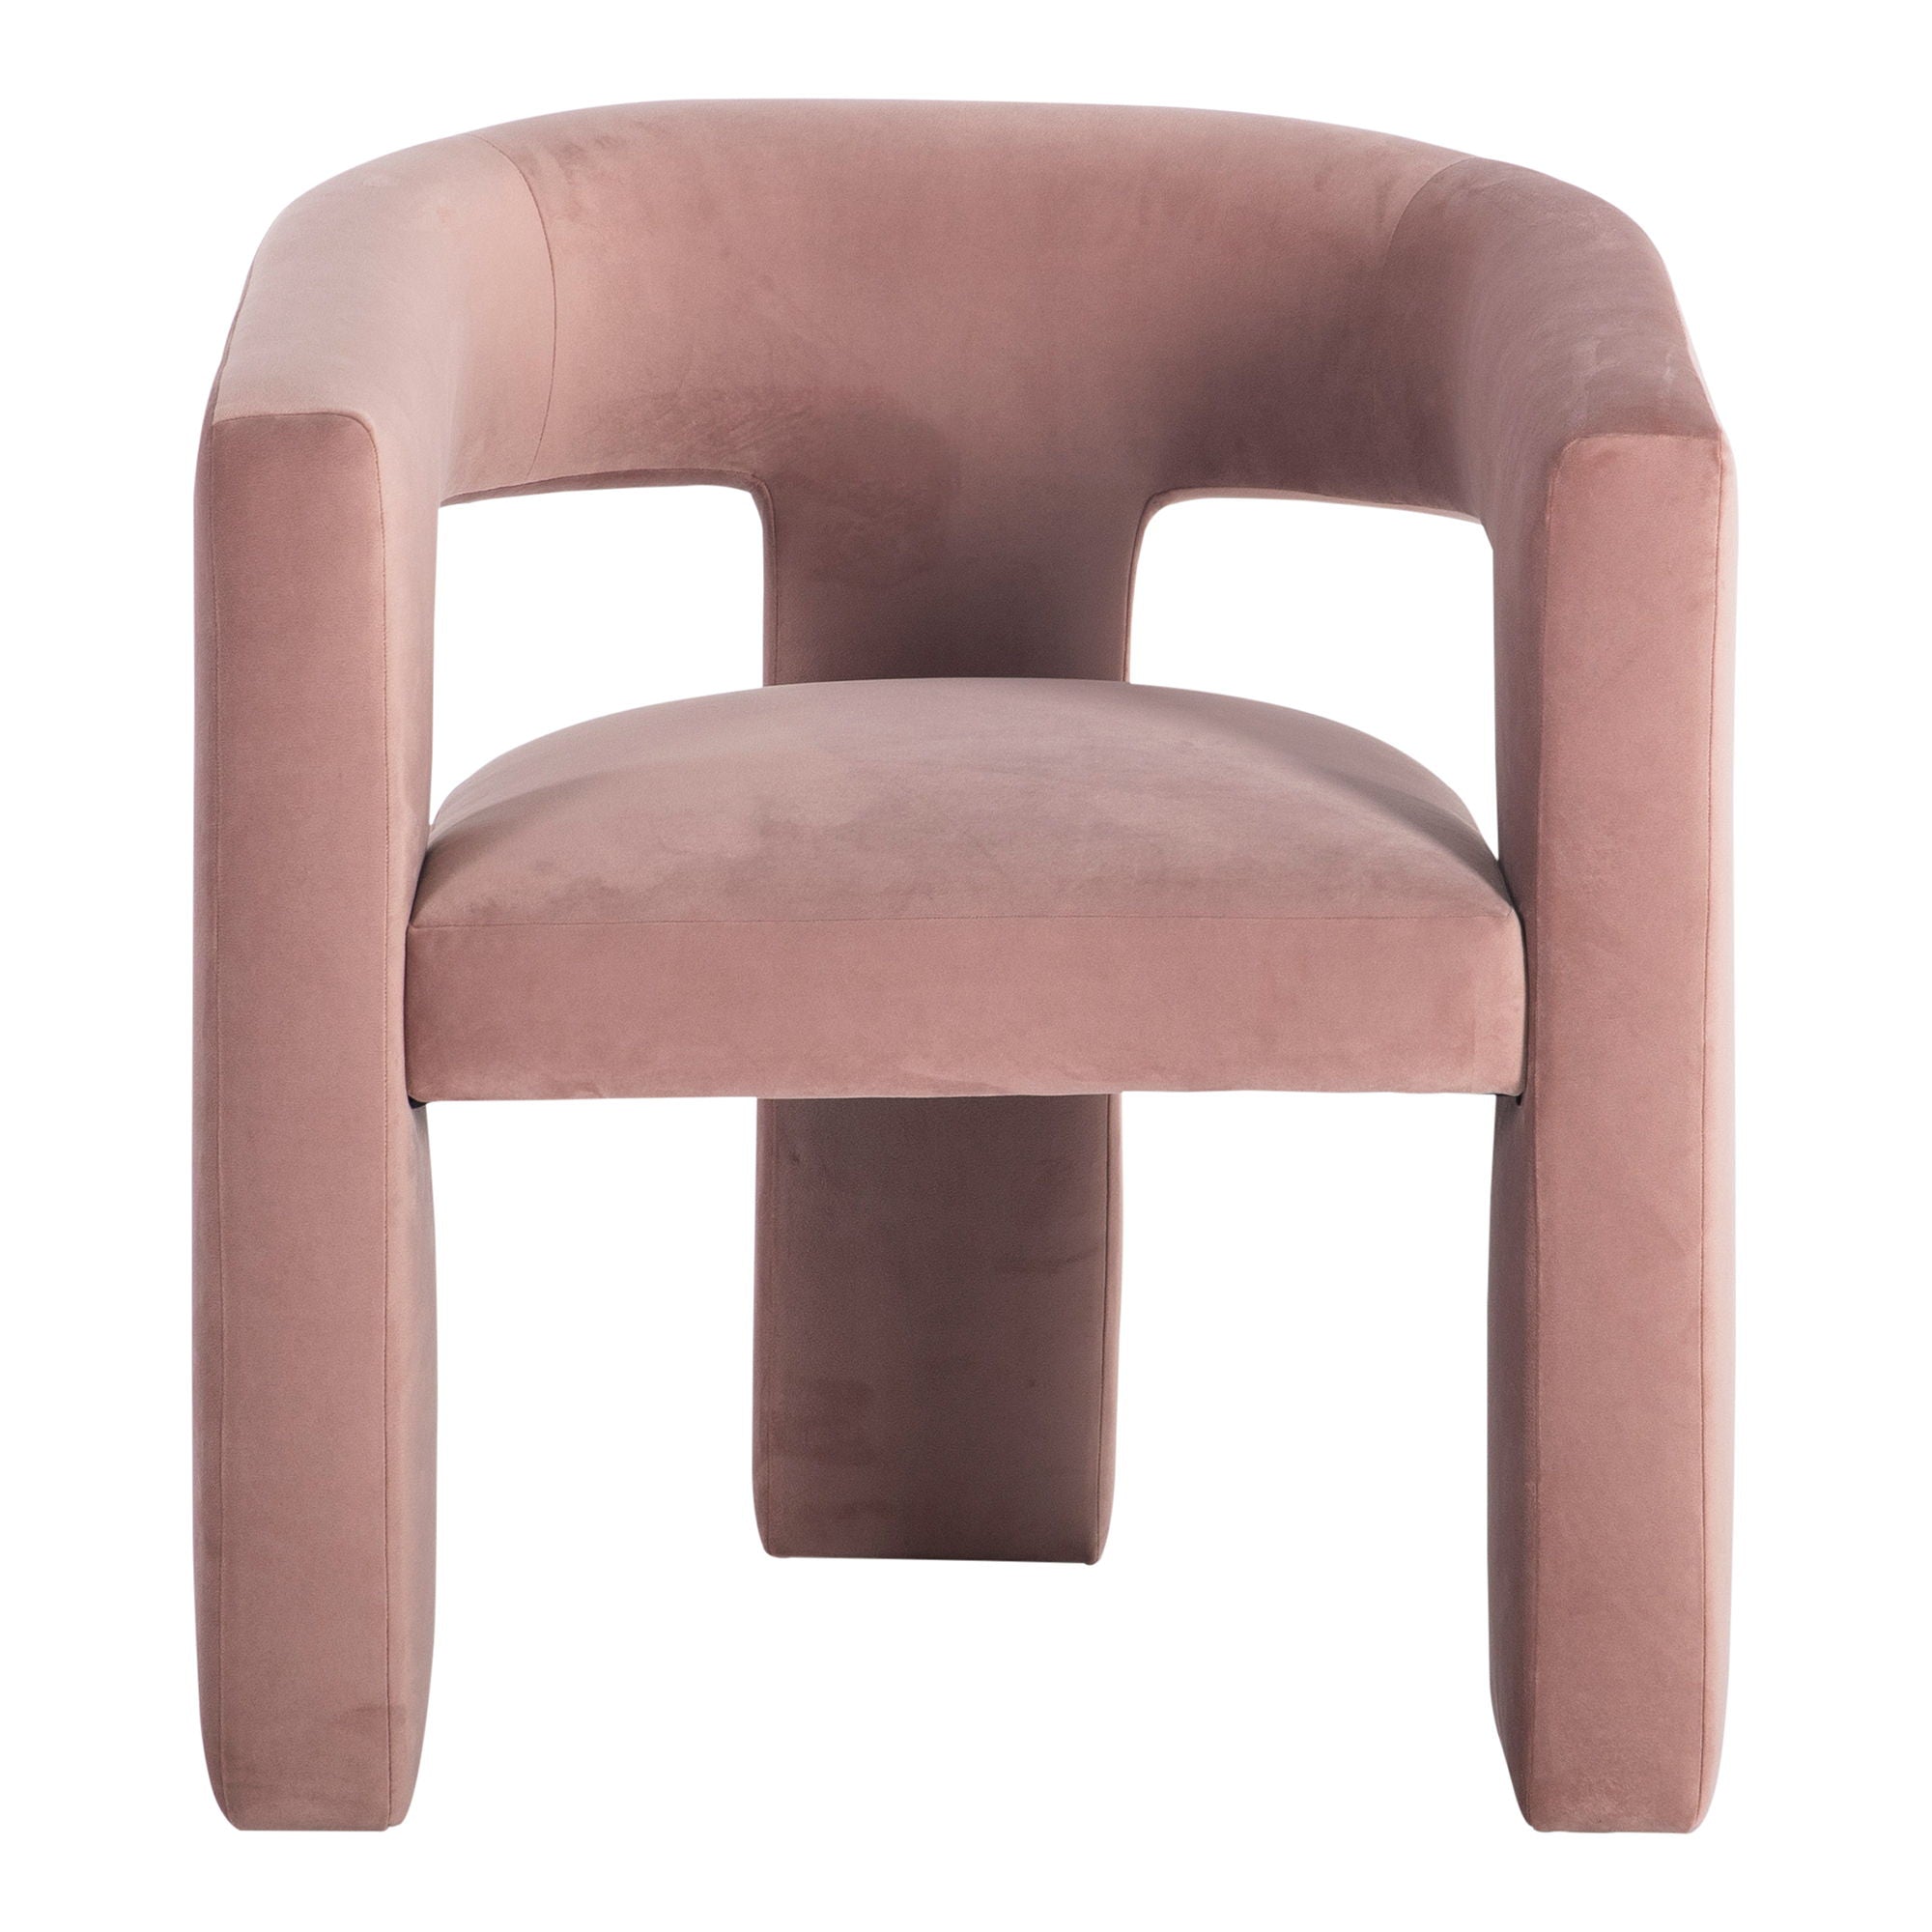 Elo - Chair - Pink